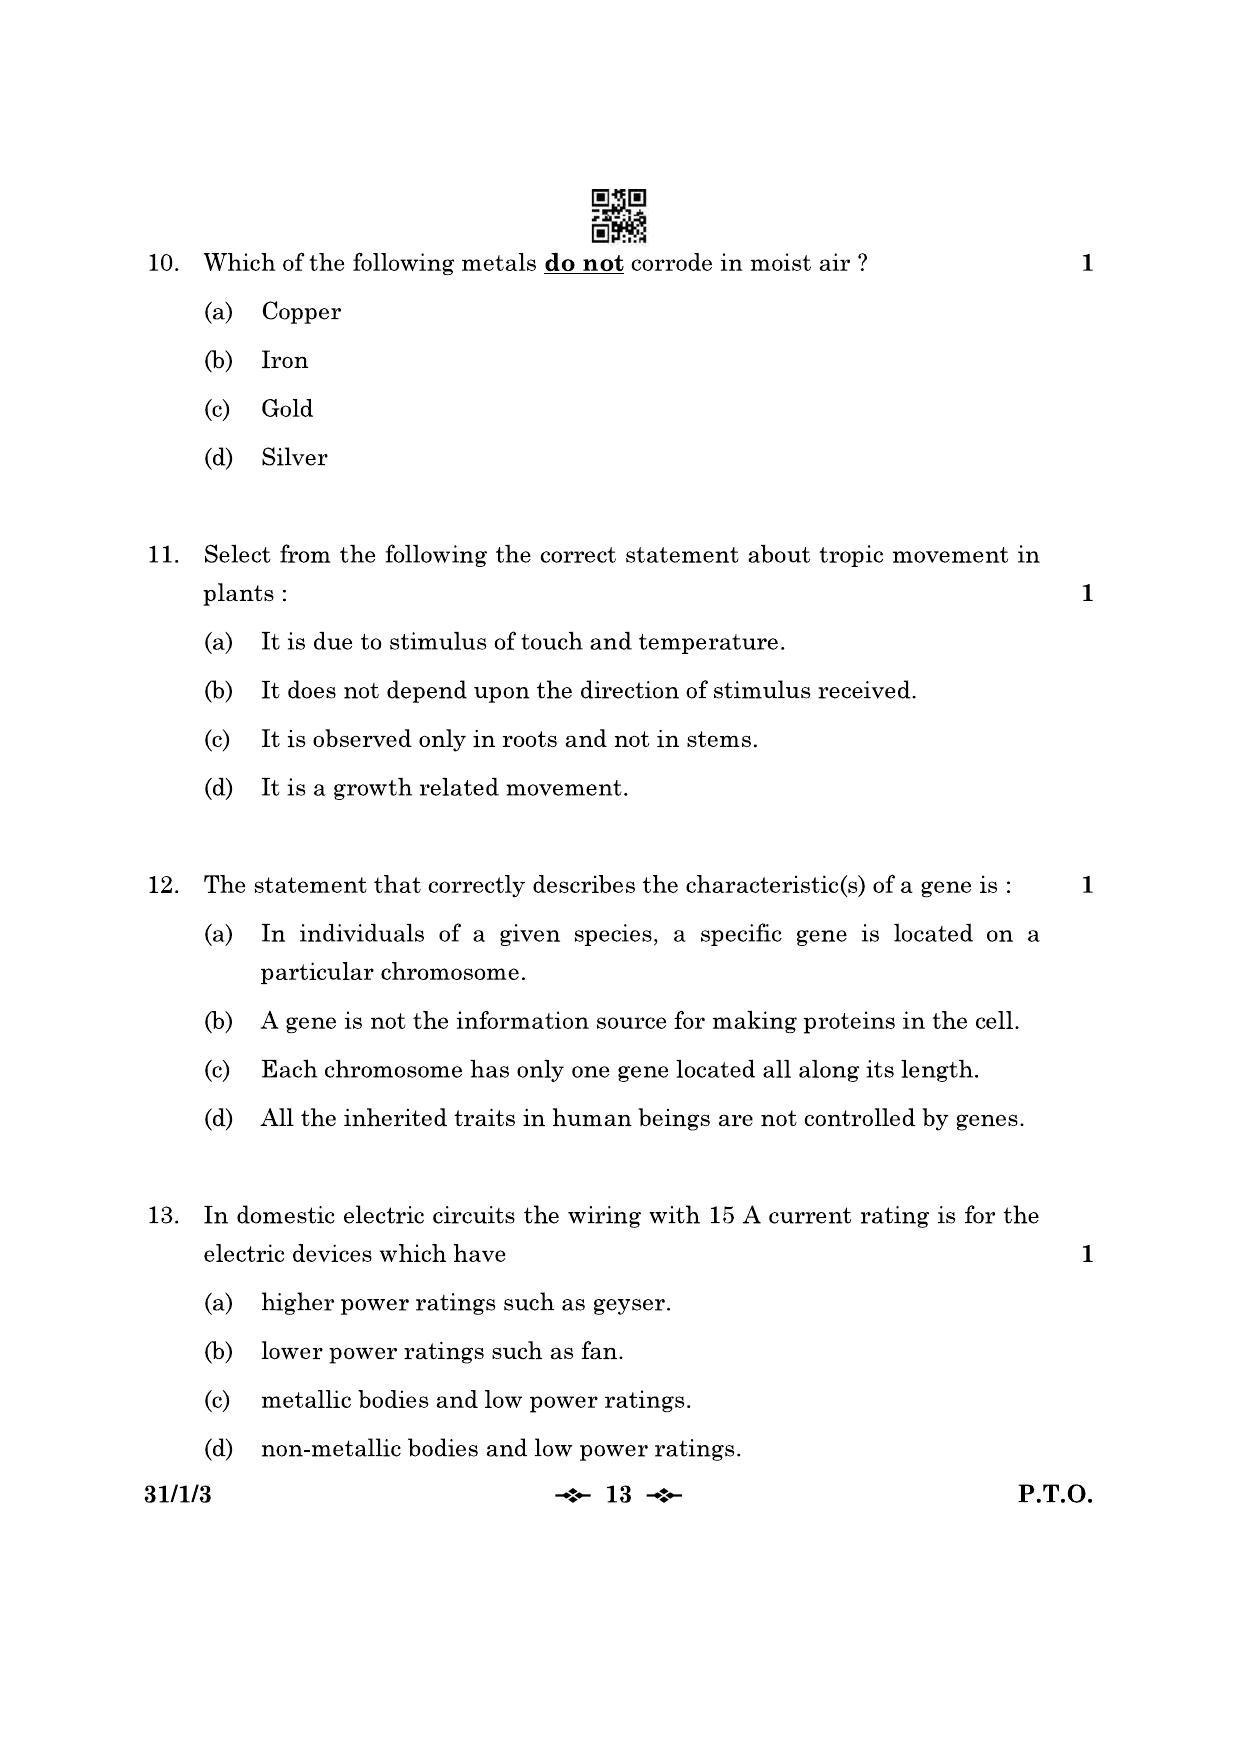 CBSE Class 10 31-1-3 Science 2023 Question Paper - Page 13